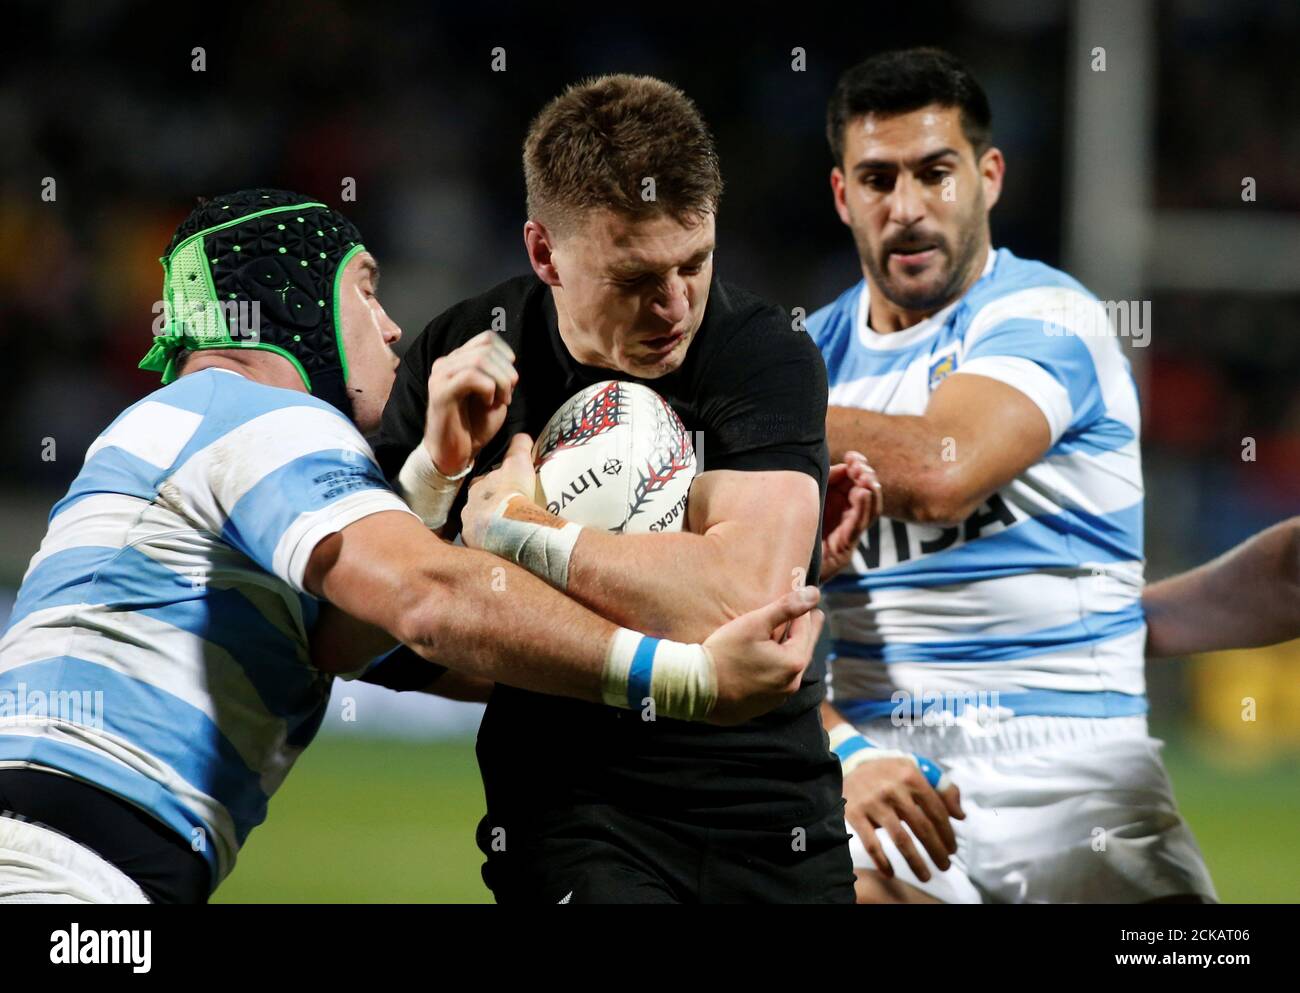 Rugby Union - Championship - New Zealand All Blacks vs Argentina Pumas -  New Plymouth, New Zealand - September 9, 2017 - New Zealand's fly-half  Beauden Barrett pushes past Argentina's defence. REUTERS/Nigel Marple Stock  Photo - Alamy